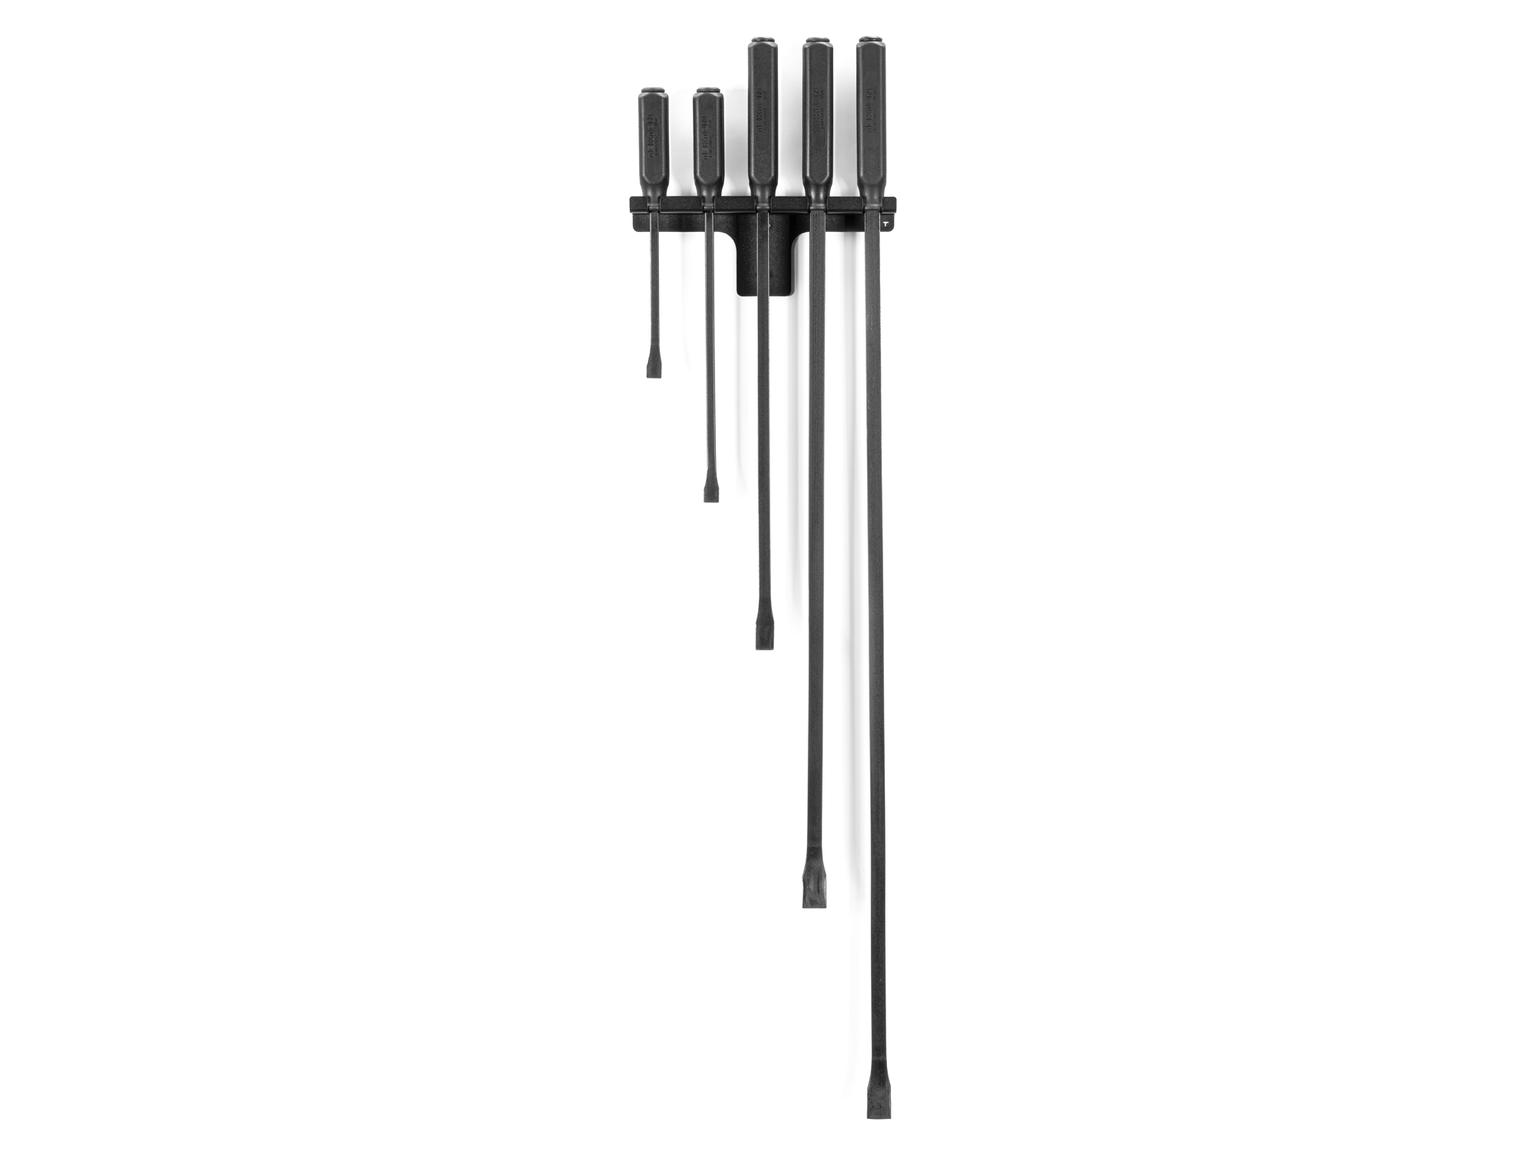 TEKTON LSQ96504-T Angled End Handled Pry Bar Set with Wall Hanger, 5-Piece (12, 17, 25, 36, 45 in.)